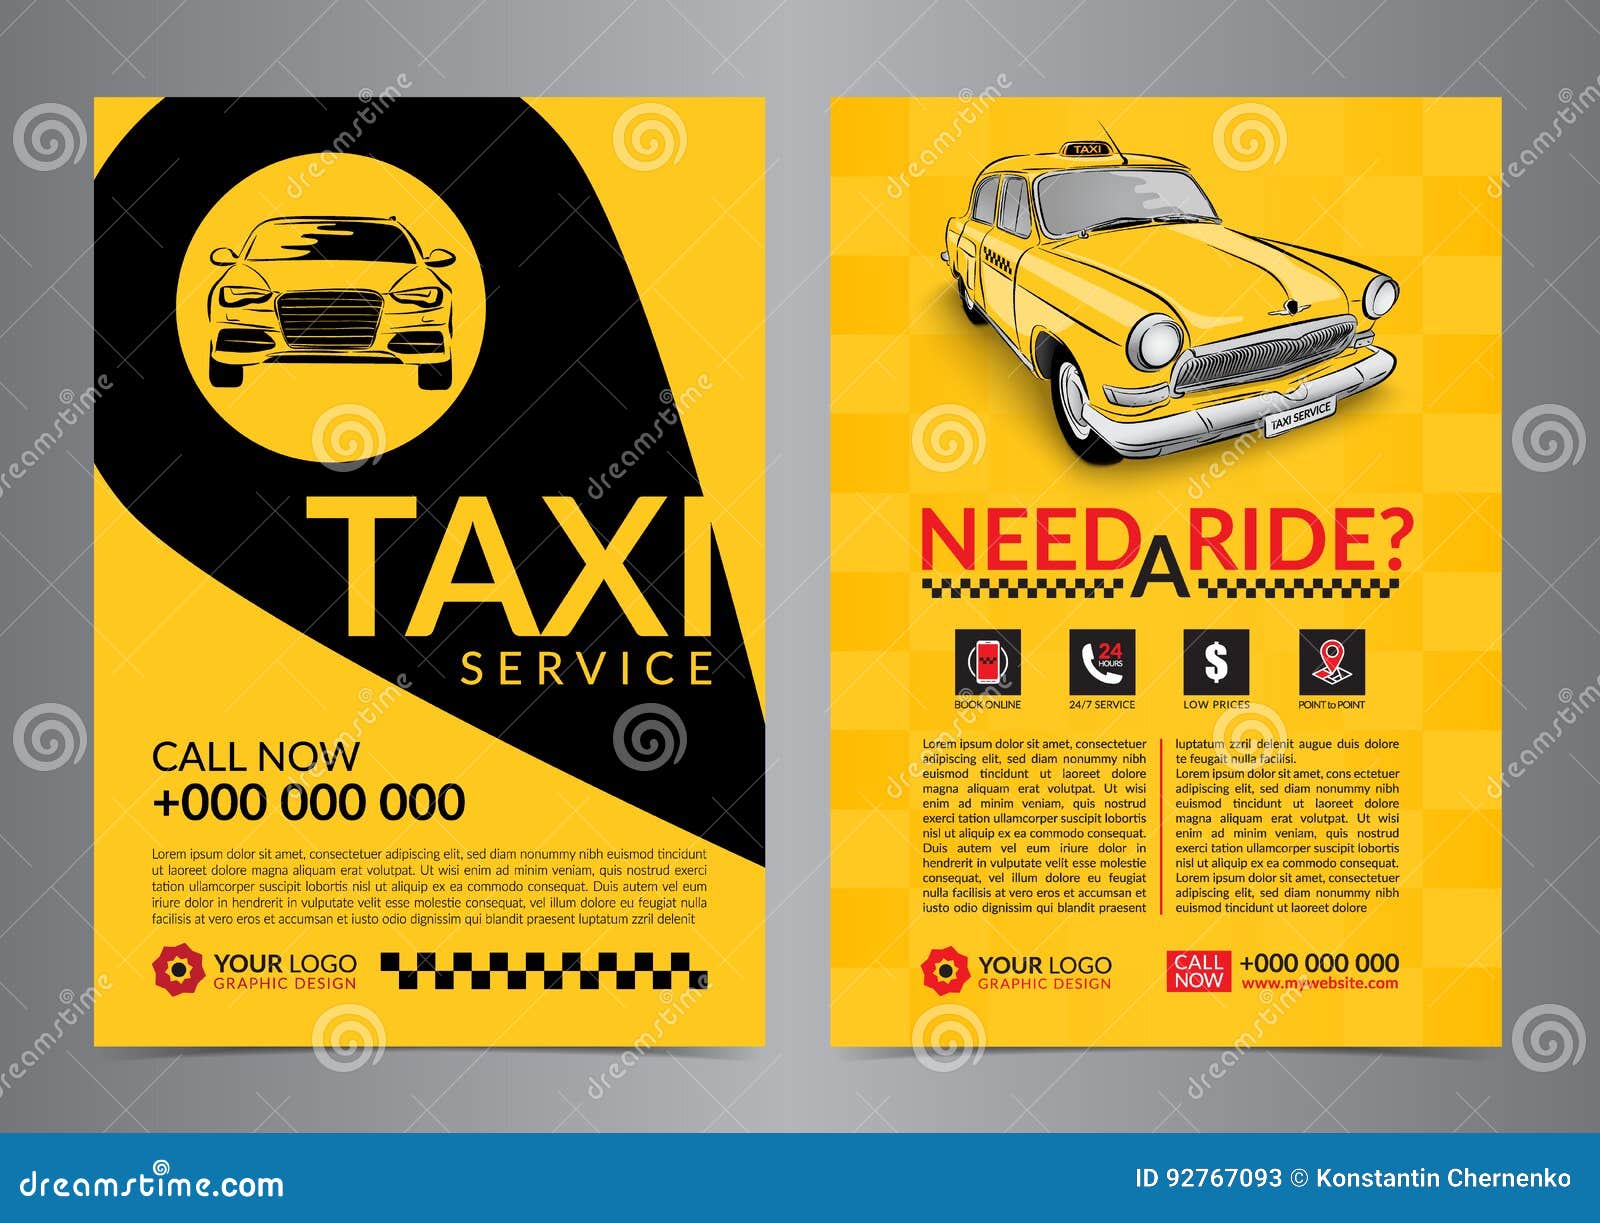 Taxi Pickup Service Design Layout Templates A4 Call Taxi Concept Flyer Stock Vector Illustration Of Magazine Abstract 92767093